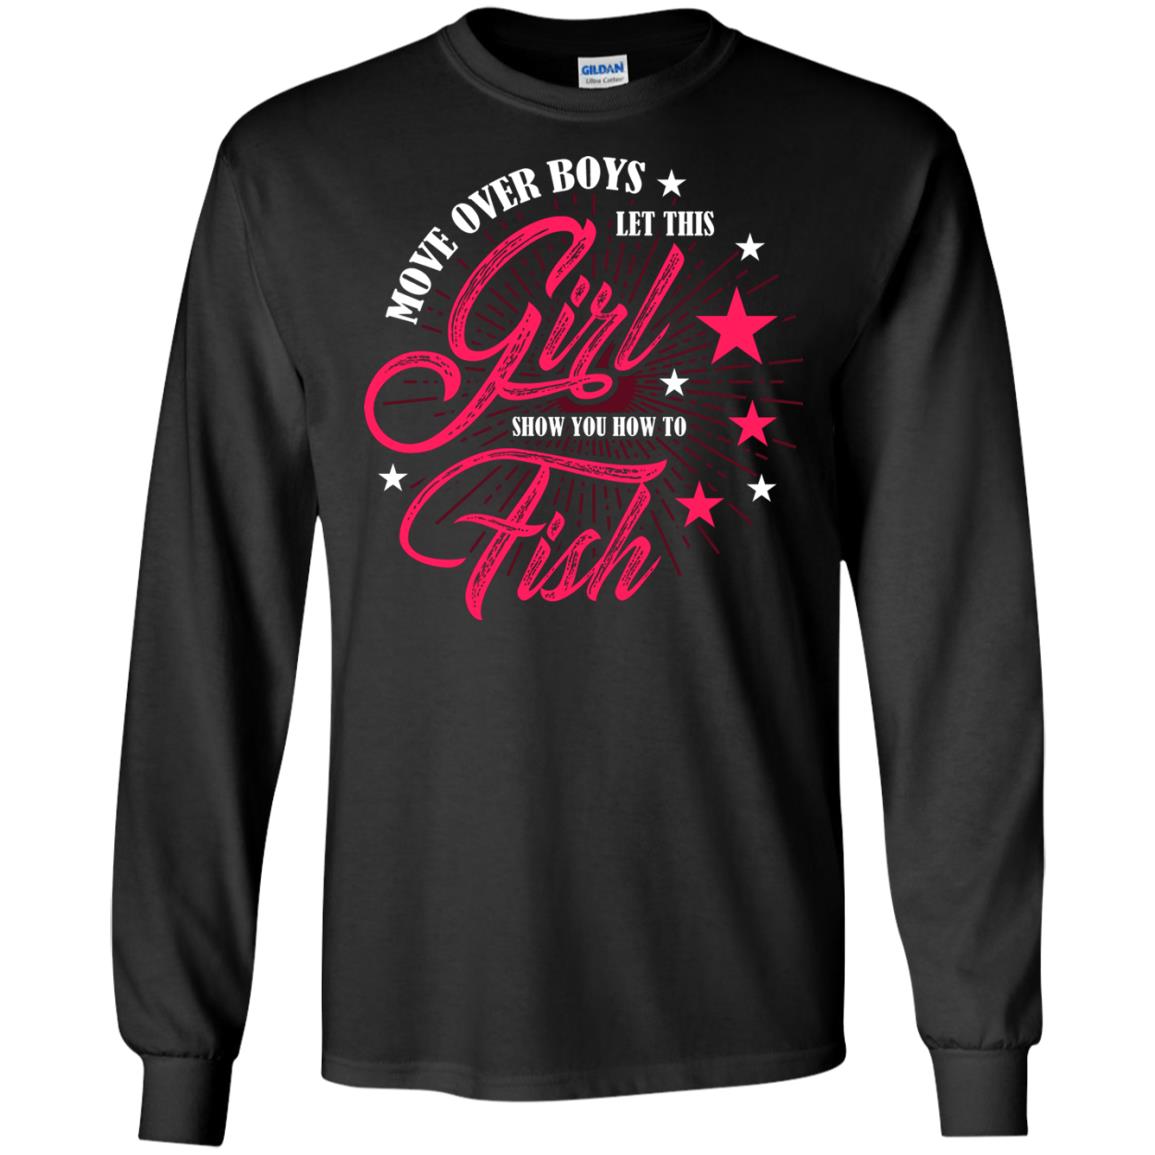 Move Over Boys Let This Girl Show You How To Fish Cool Fishing Gift Shirt For Boys